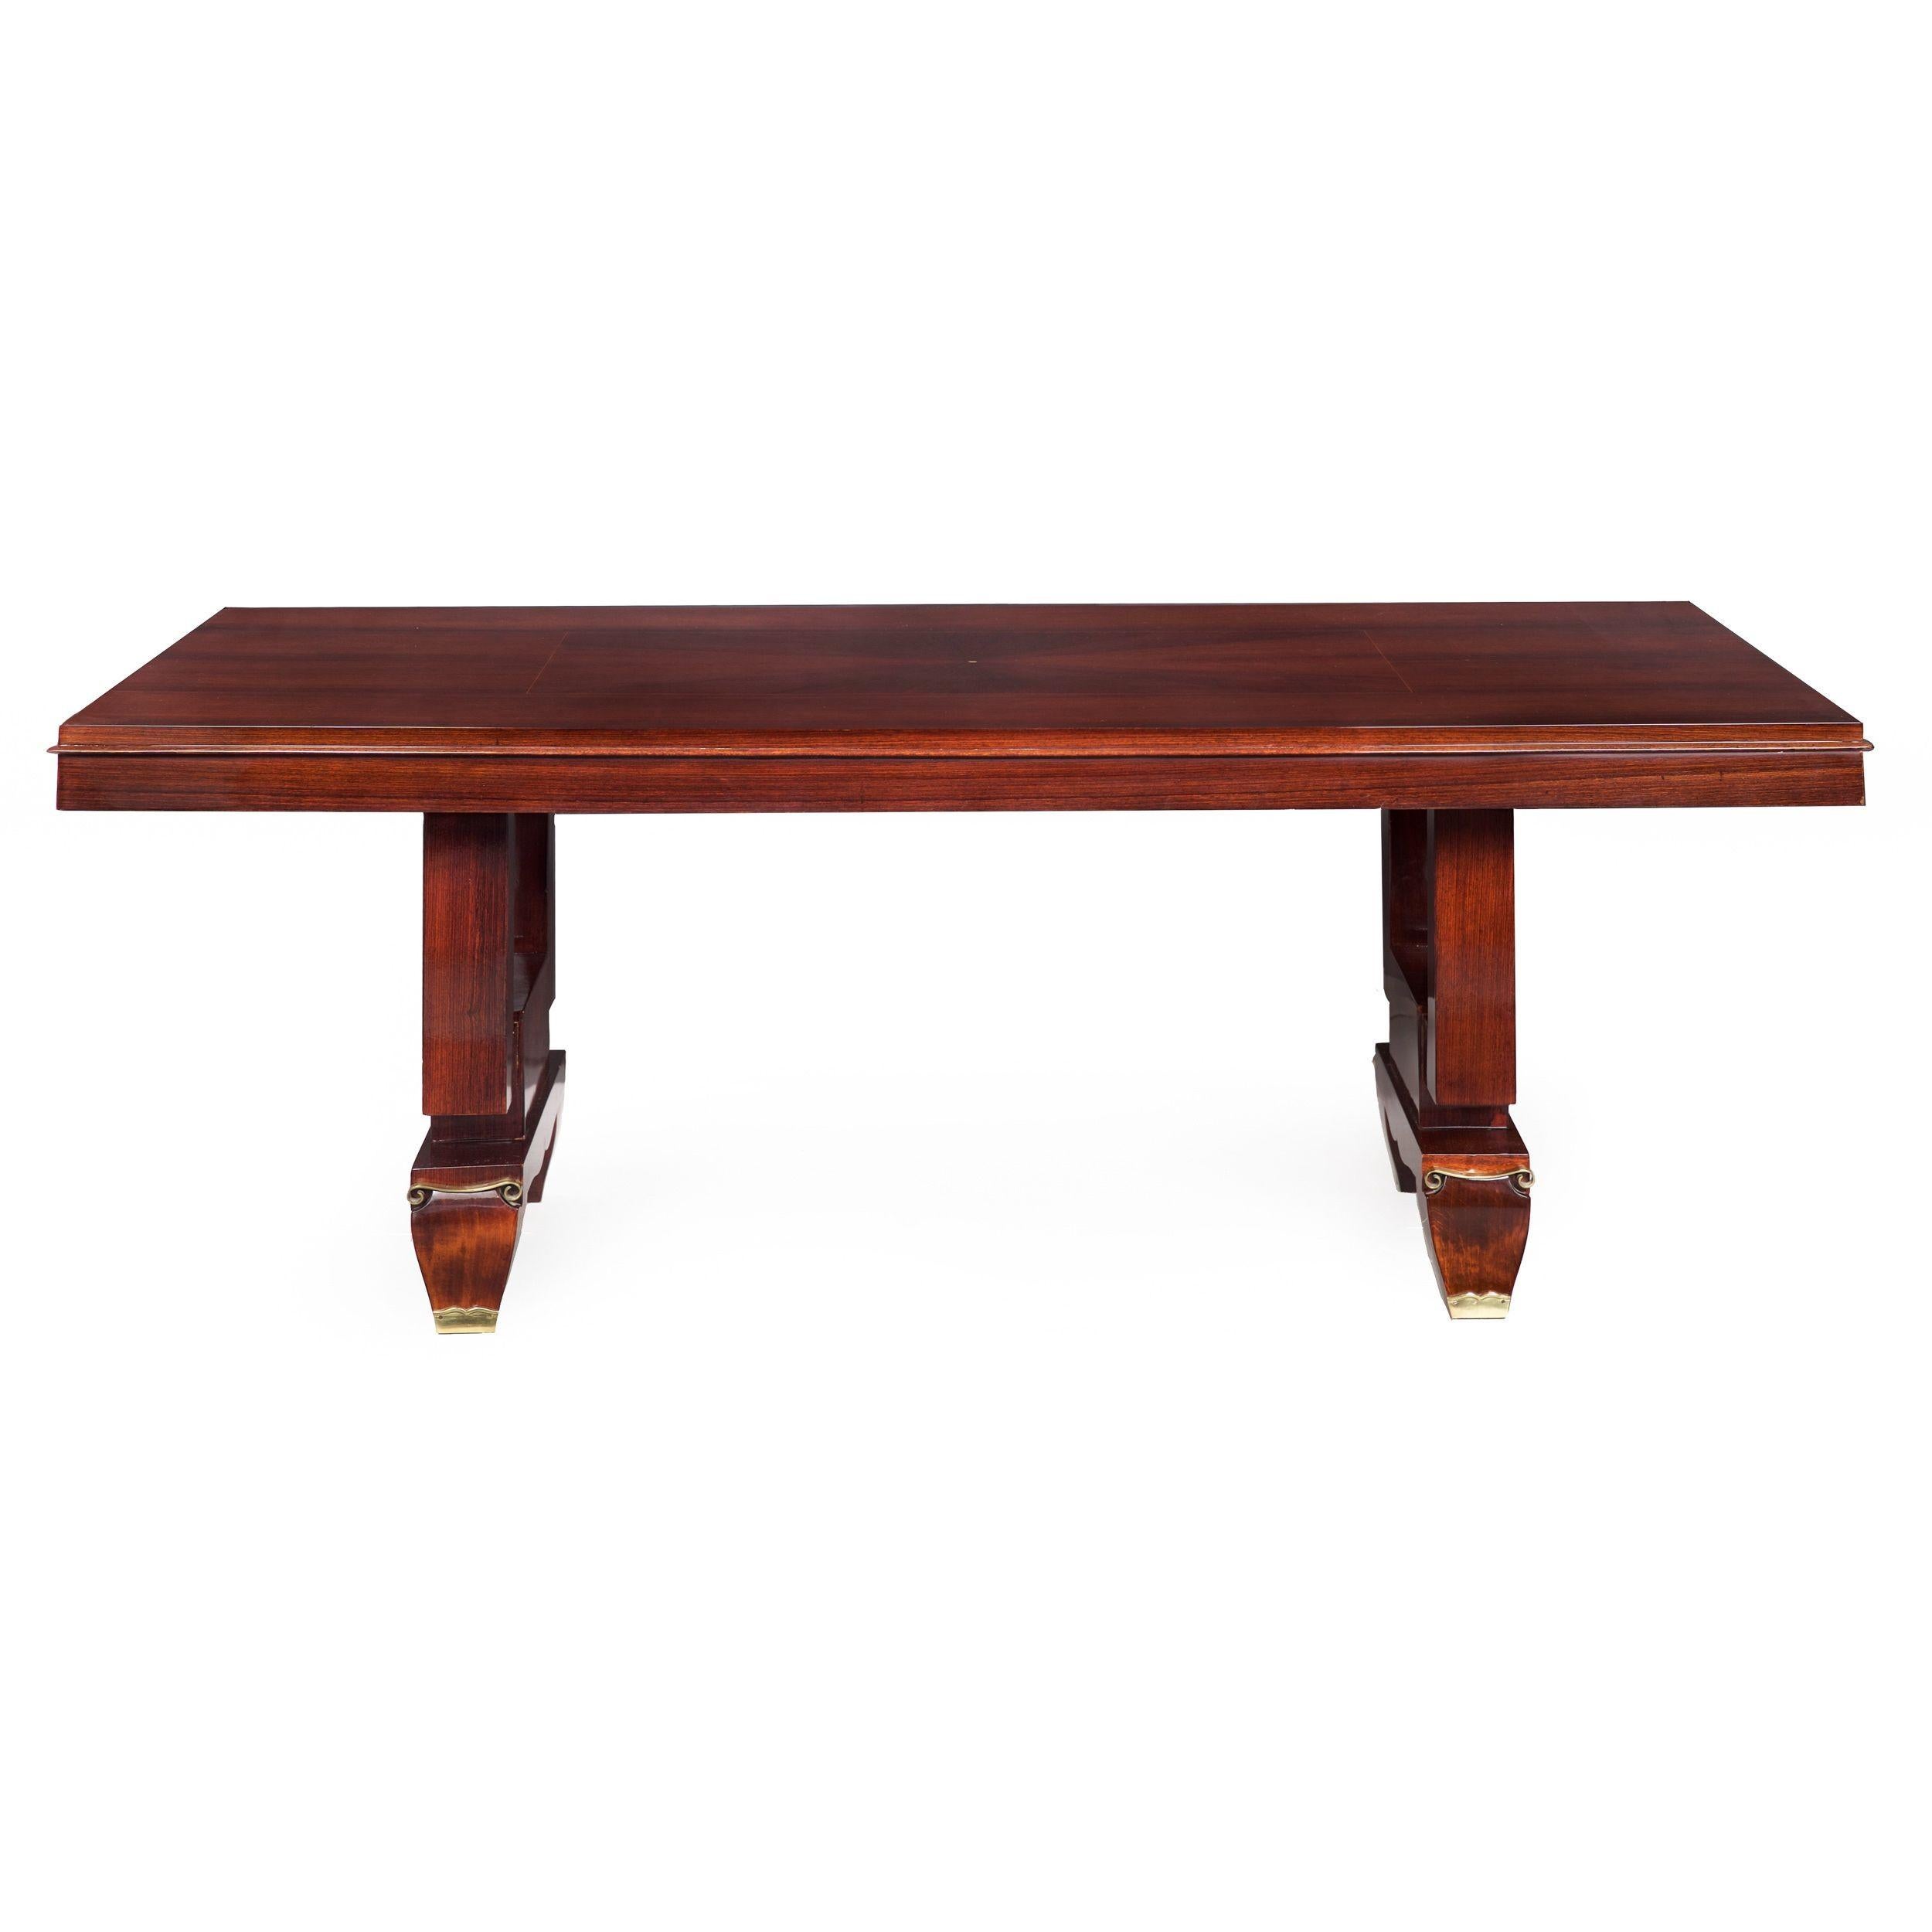 French Art Deco Inlaid Mother-of-Pearl Rosewood Dining Table, circa 1940s For Sale 10